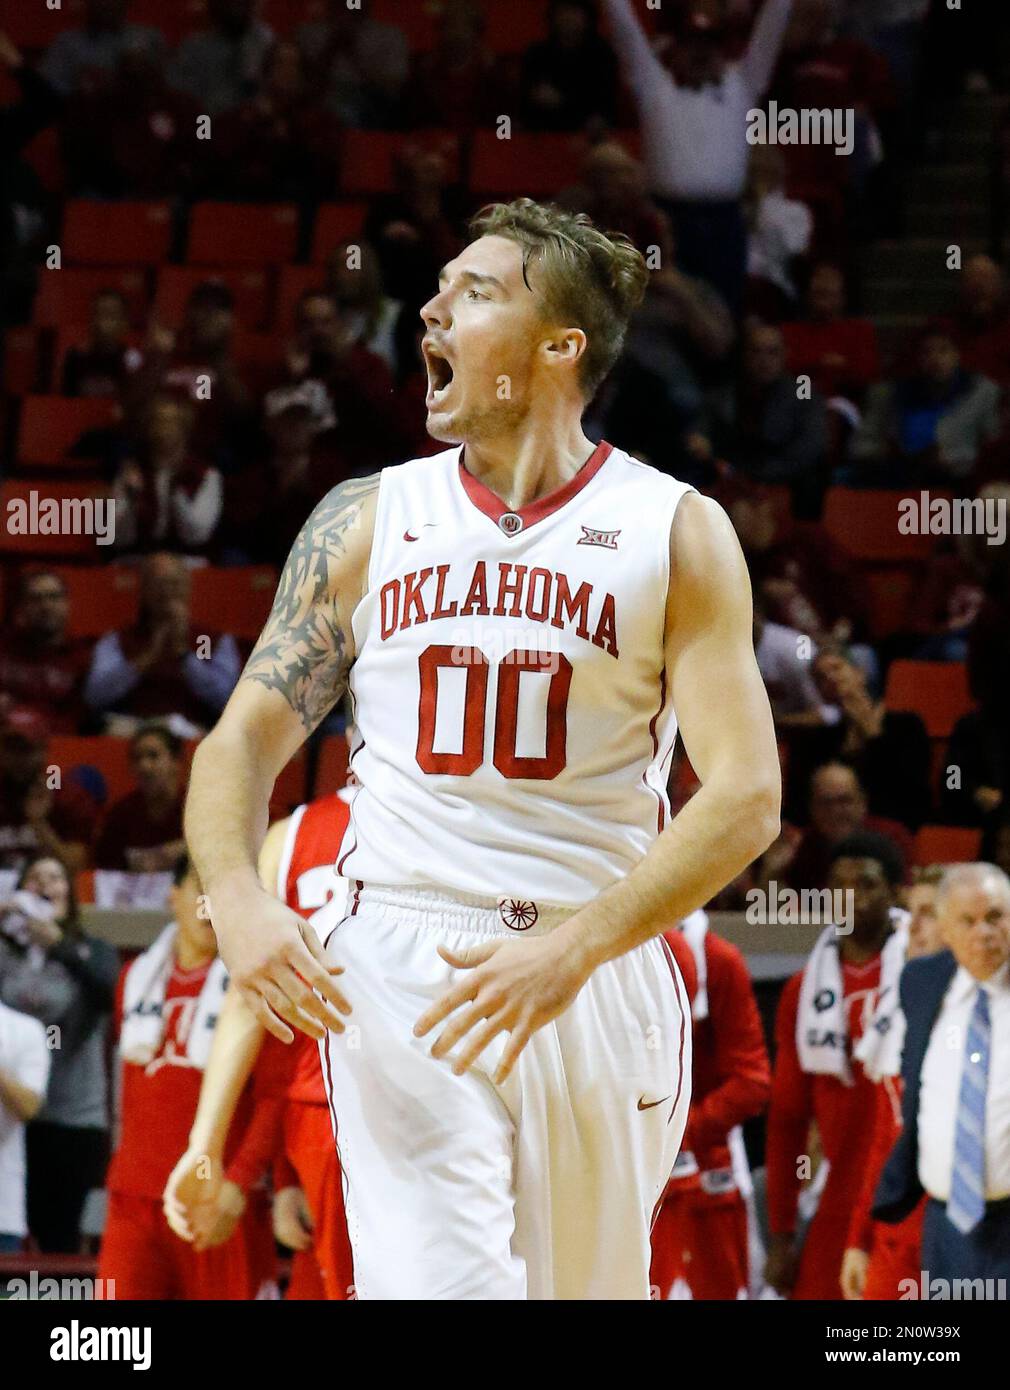 Oklahoma forward Ryan Spangler (00) reacts after his team scored against Wisconsin during the first half of an NCAA college basketball game in Norman, Okla., Sunday, Nov